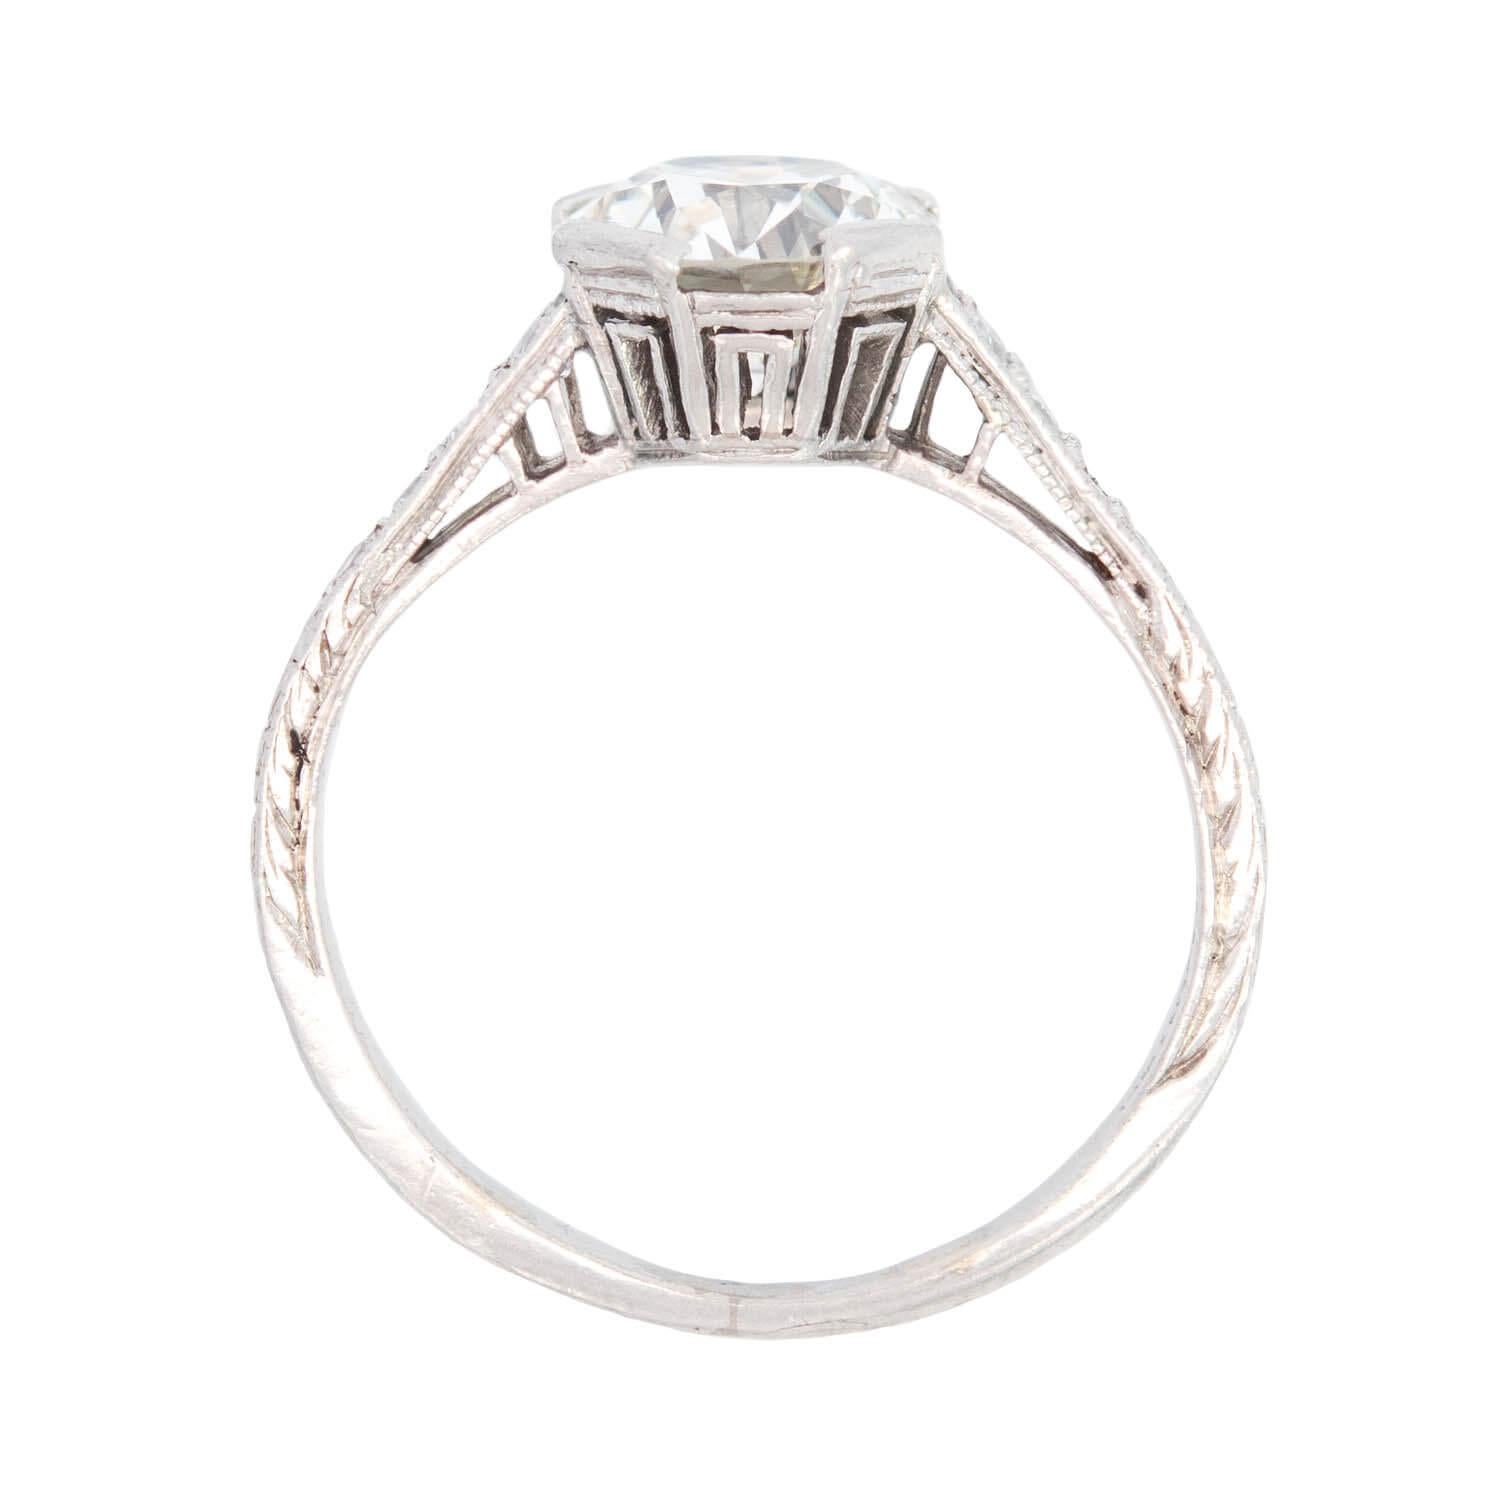 1 TIFFANY & CO. Art Deco Platinum Diamond Engagement Ring 1.25ct In Good Condition For Sale In Narberth, PA